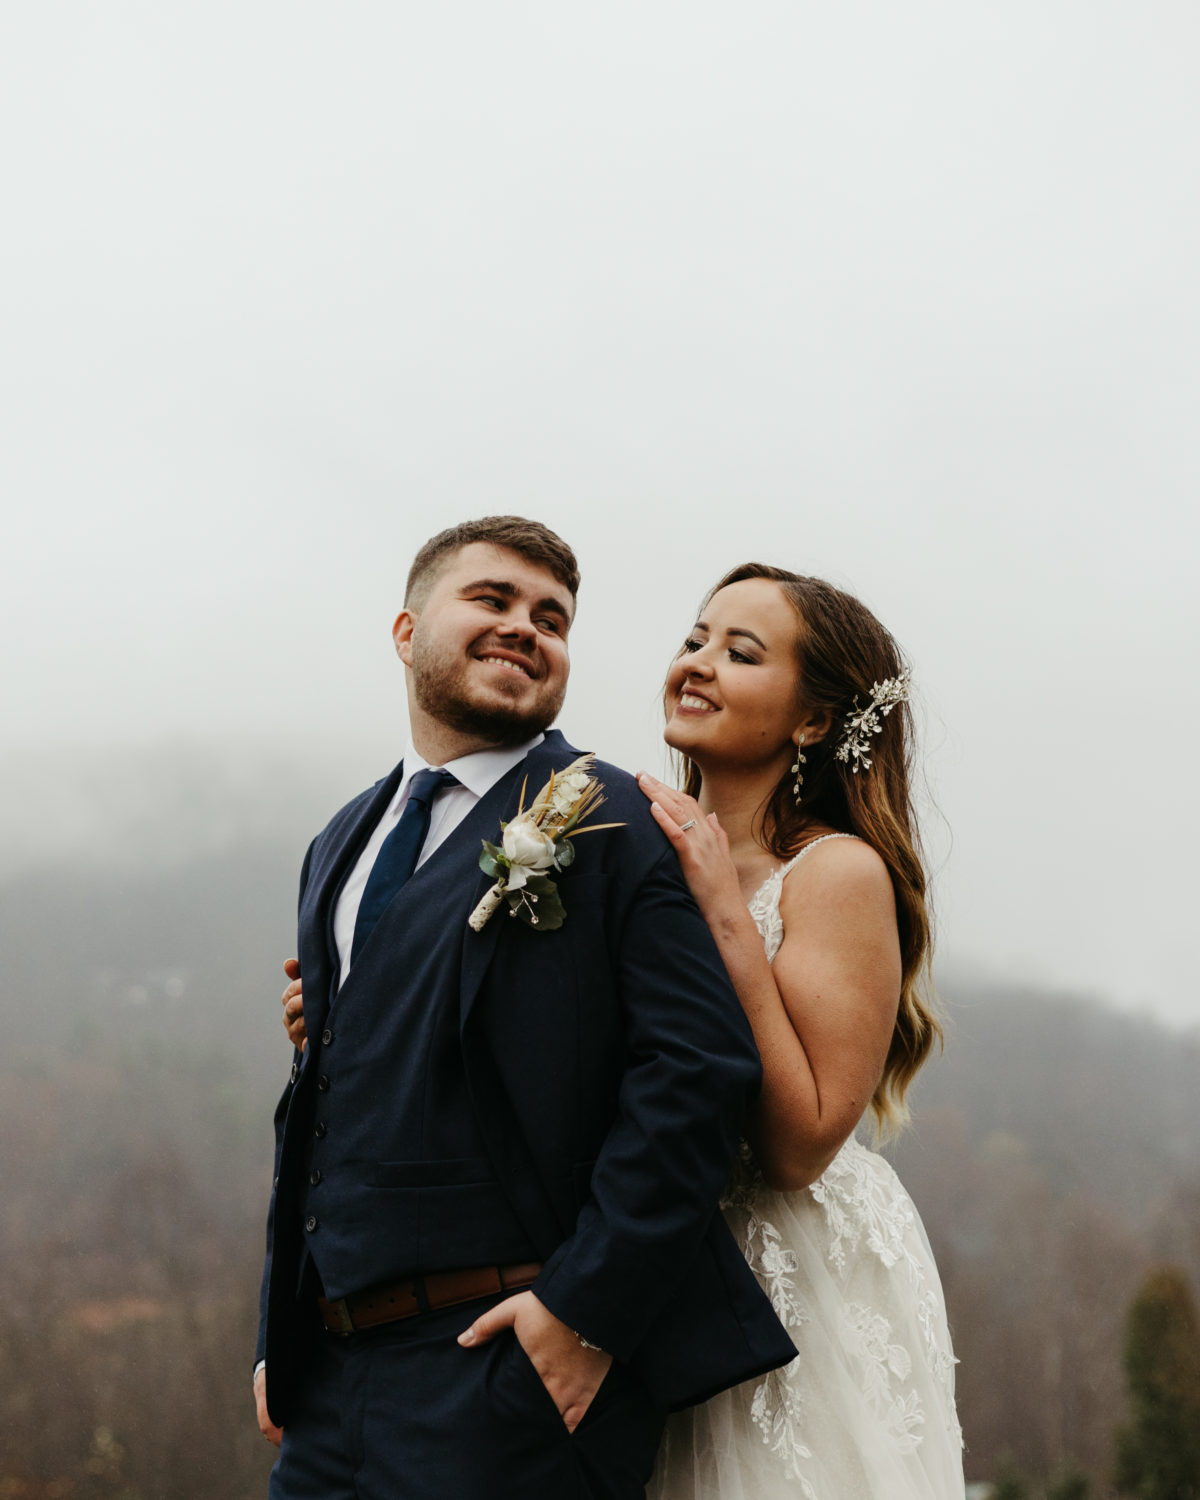 A bride and groom smiling during their smoky mountain elopement